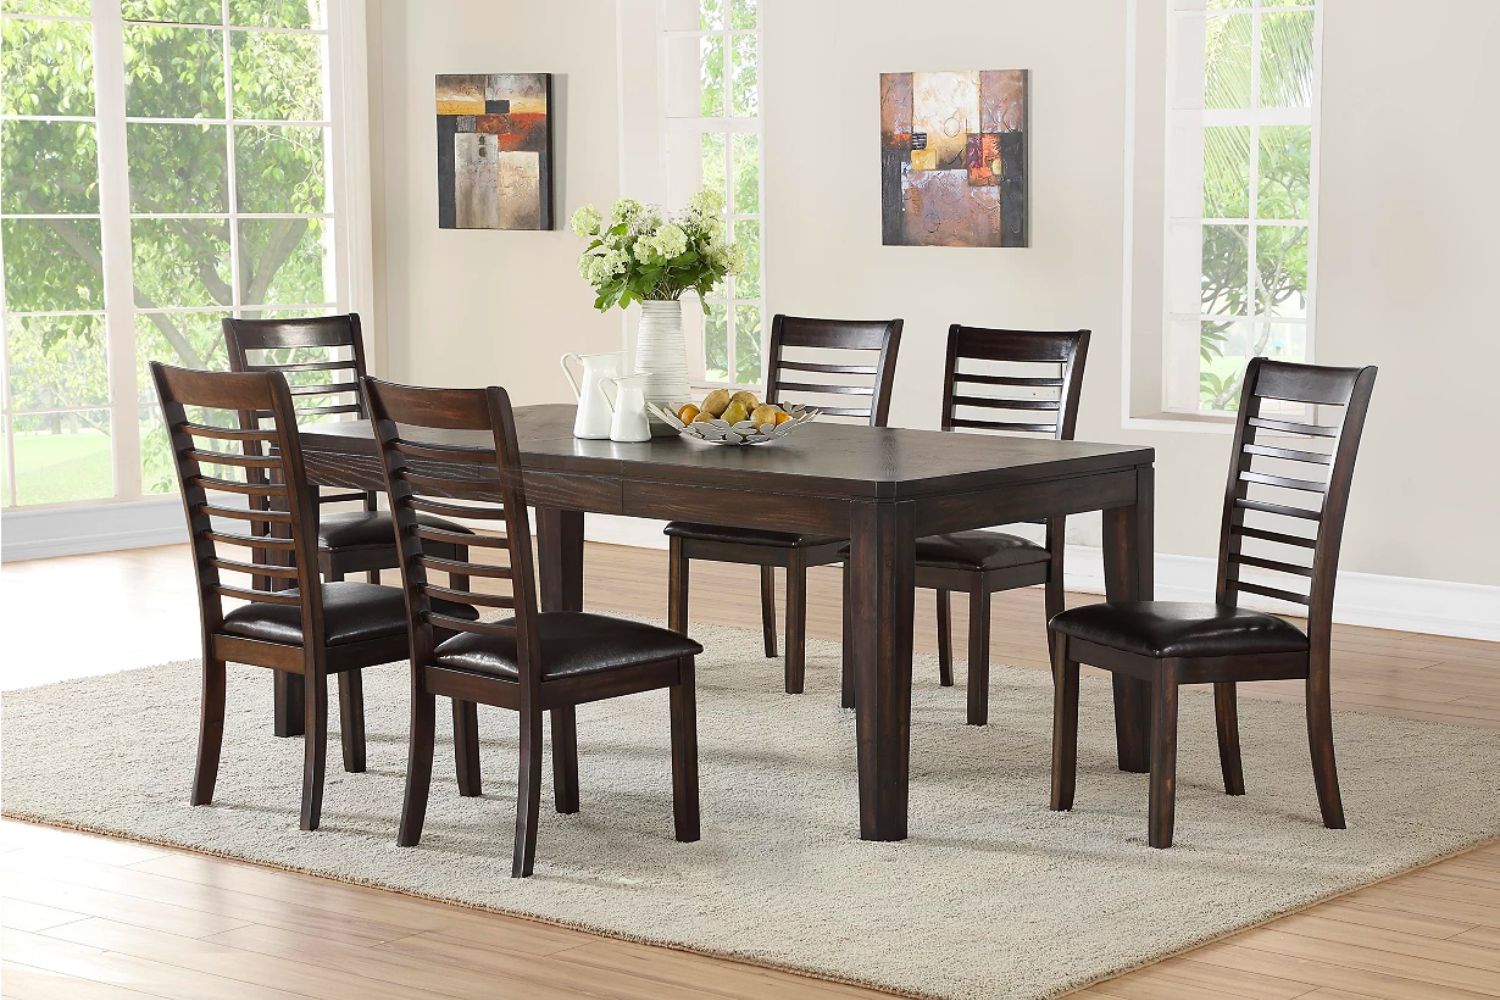 Deals Roundup Cyber Monday Furniture 11/29: Ally Dining 7-Pc Set